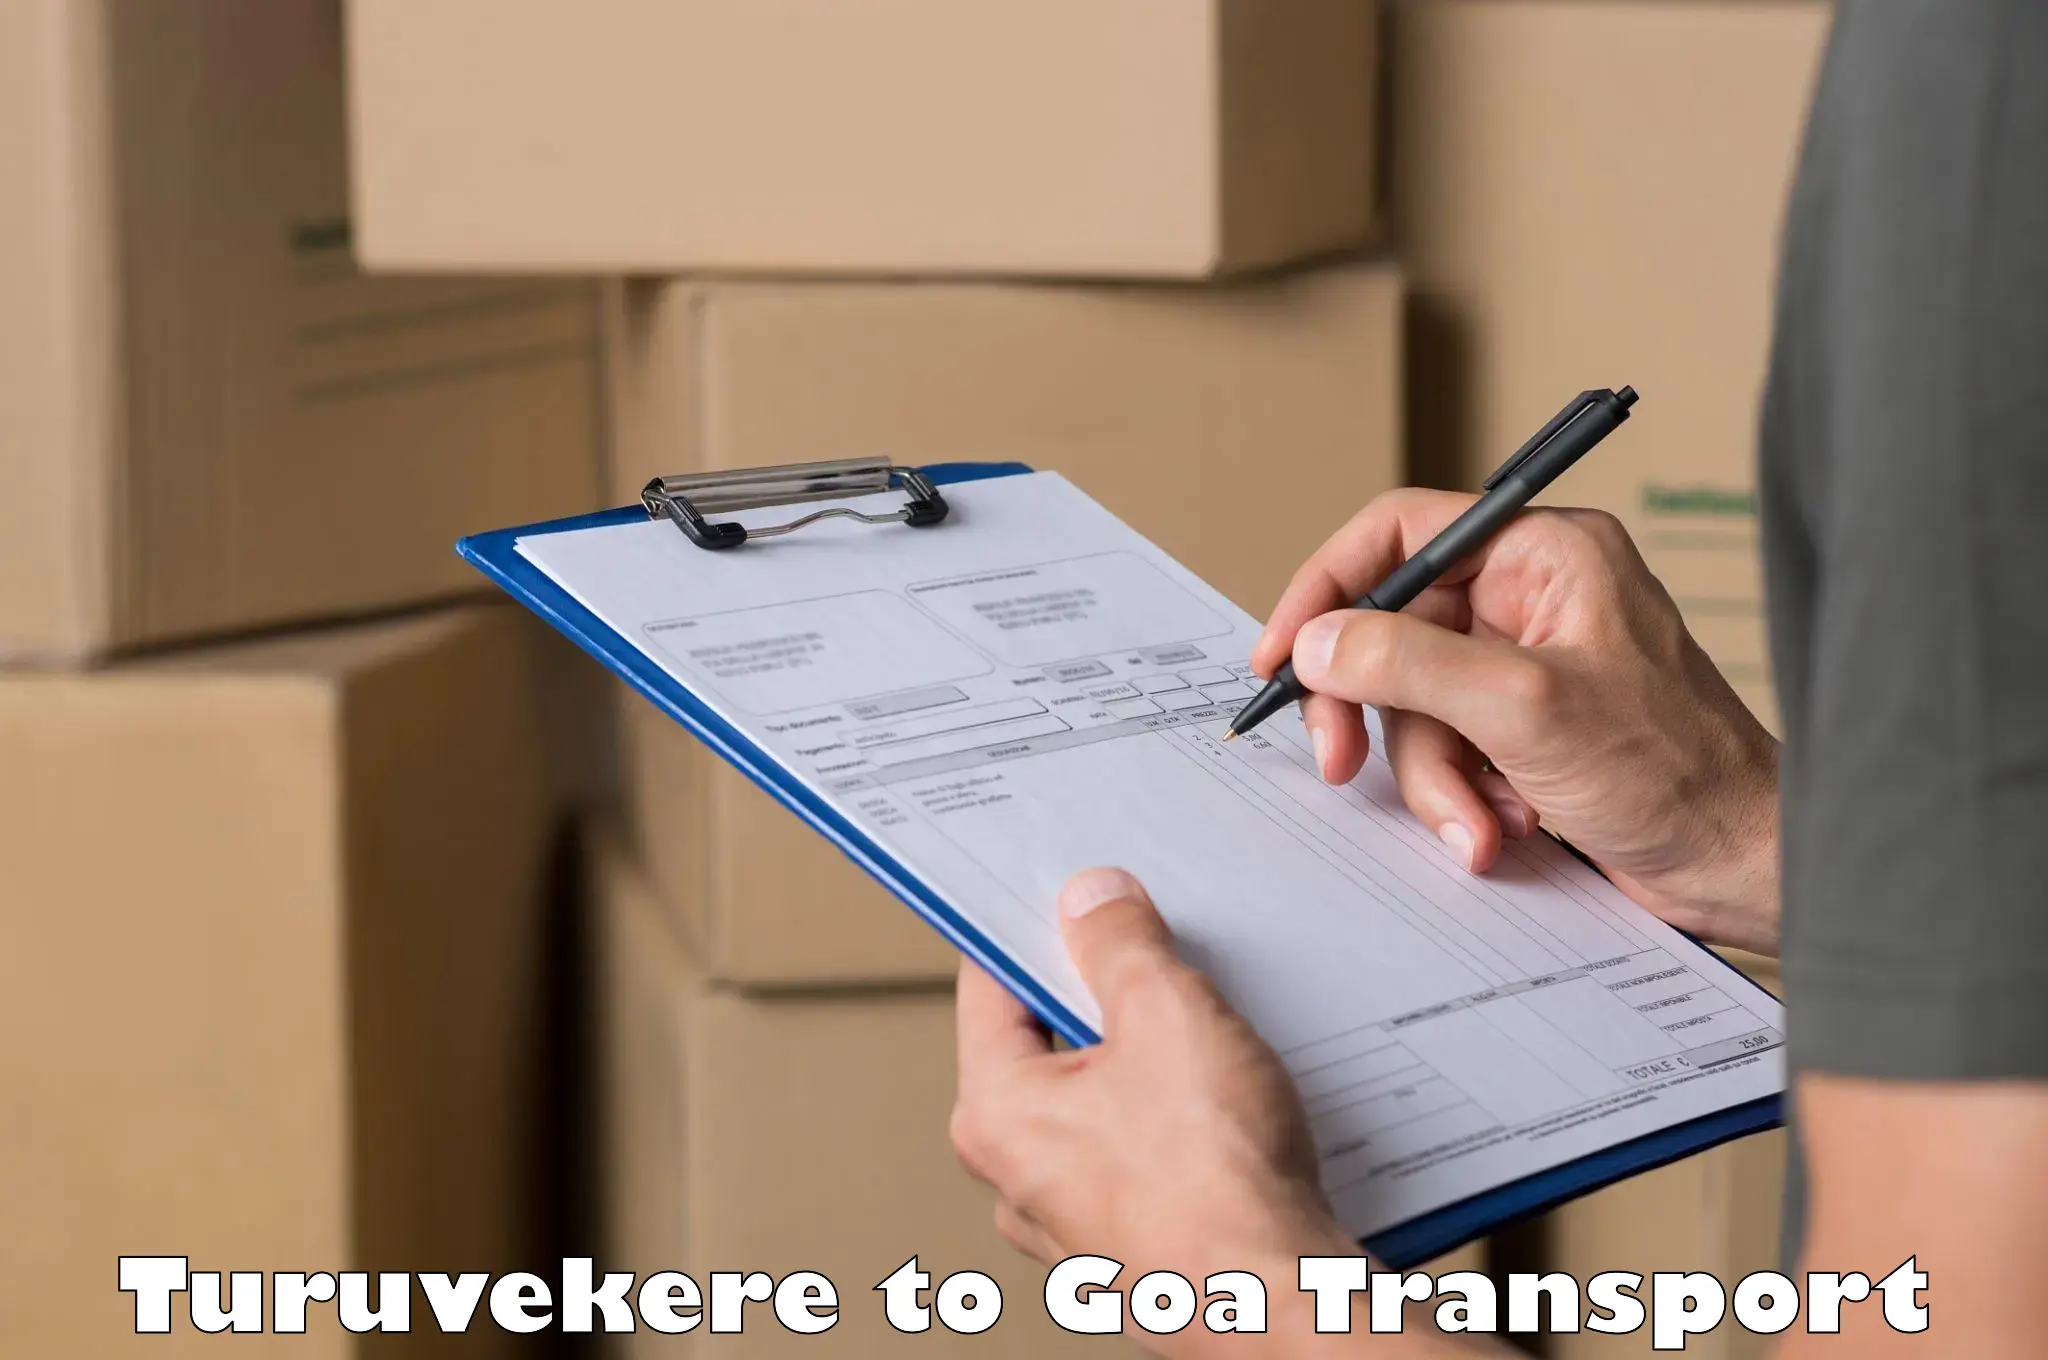 Transport shared services Turuvekere to Panaji